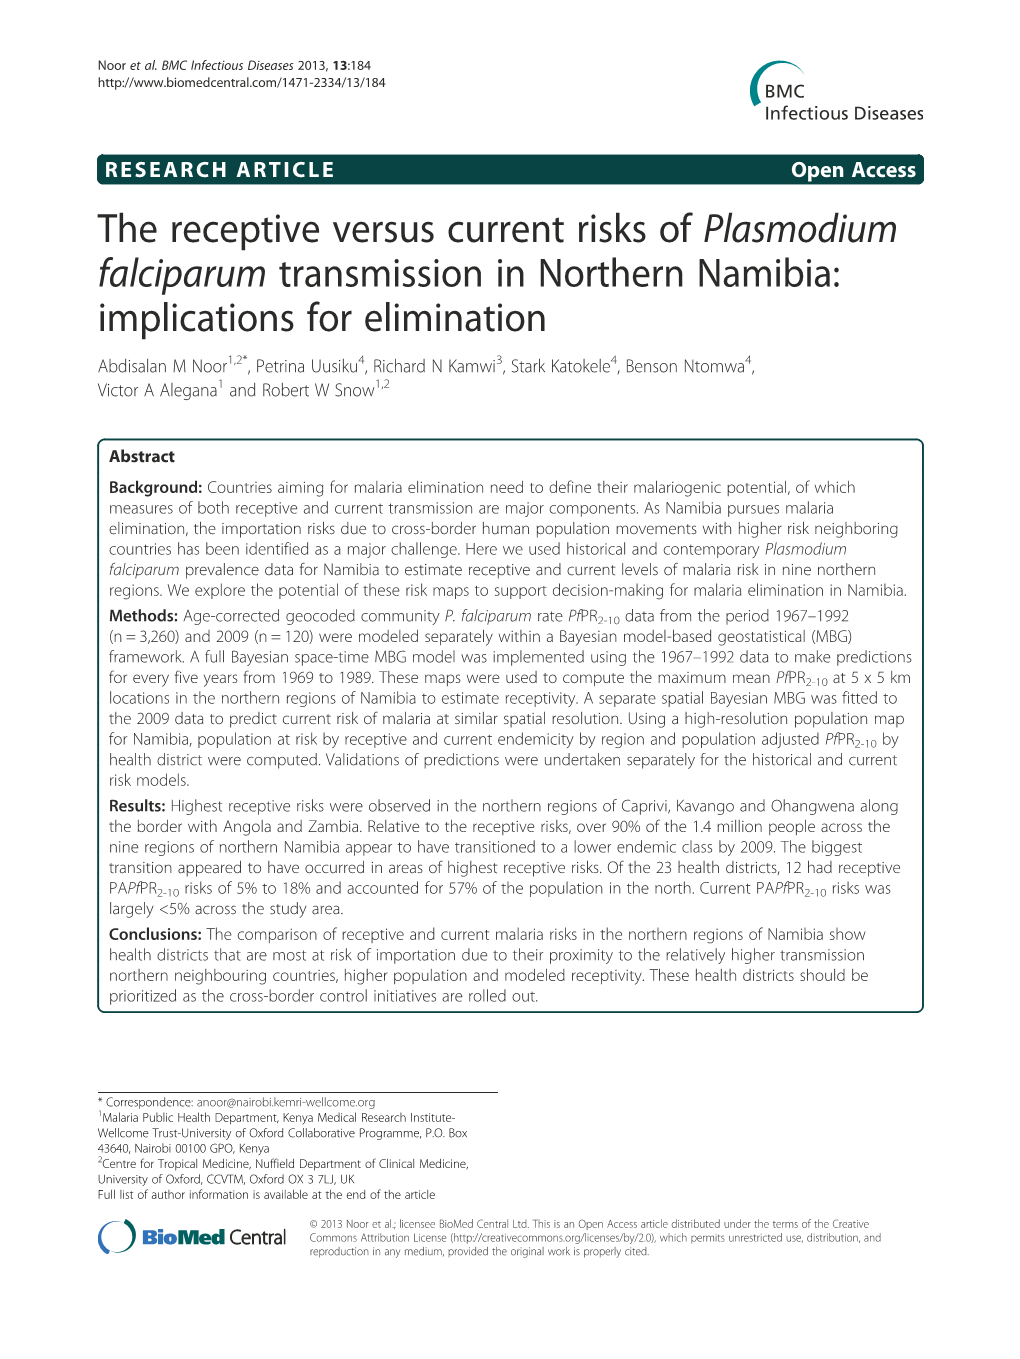 The Receptive Versus Current Risks of Plasmodium Falciparum Transmission in Northern Namibia